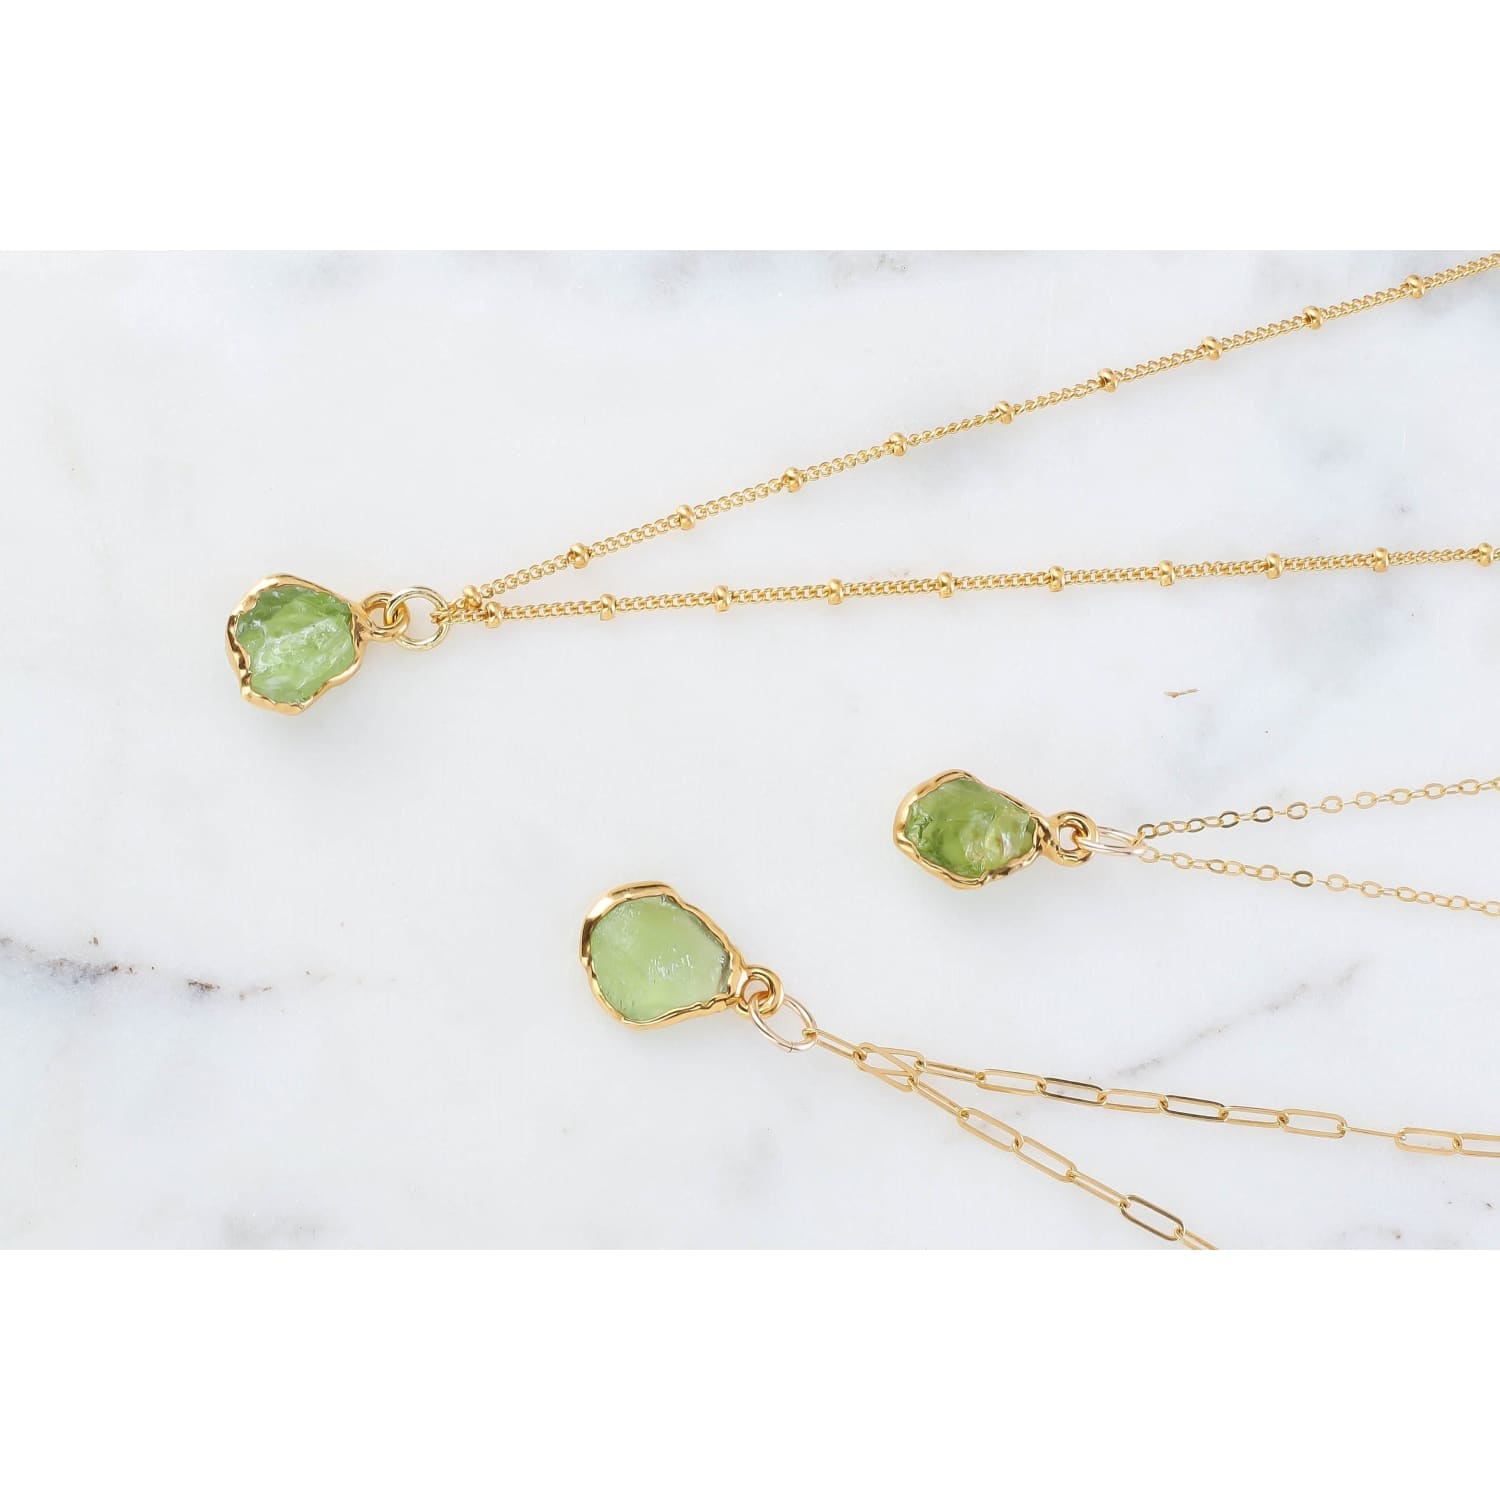 RAW PERIDOT CRYSTAL NECKLACE – By Helen P